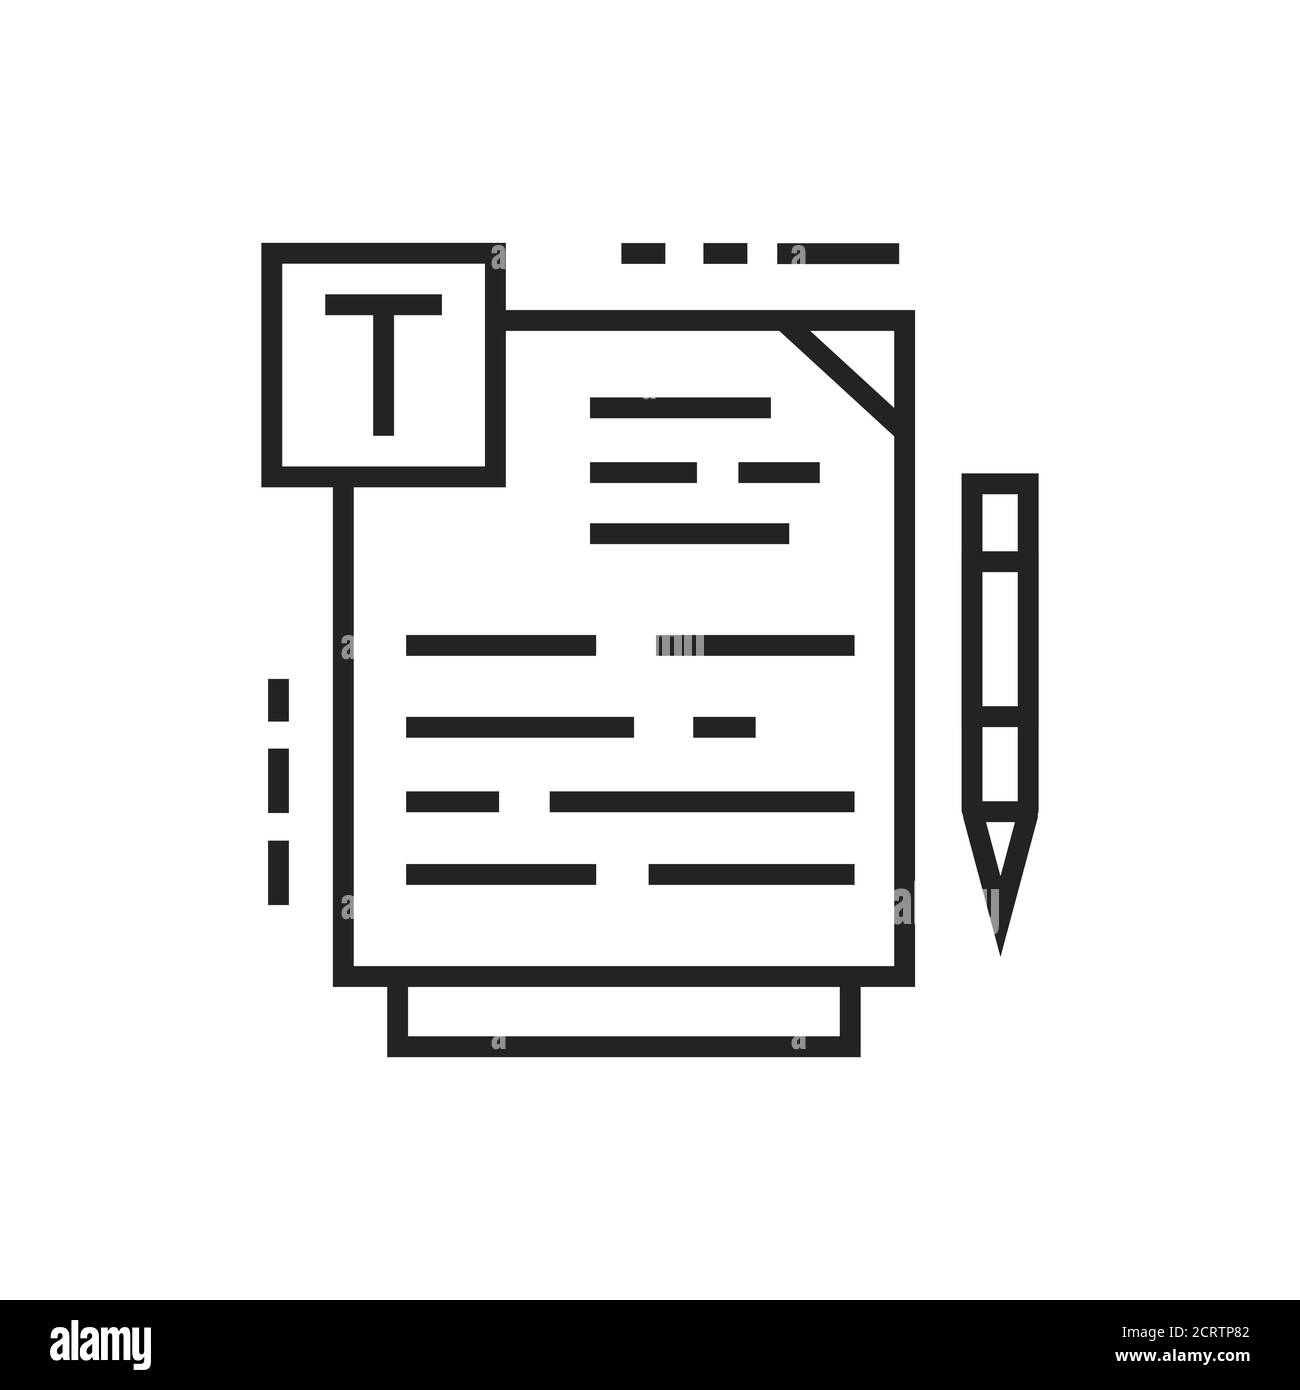 Course material black line icon. Online course learning exam. Training programs, courses and lectures. Pictogram for web page, mobile app. UI UX GUI Stock Vector